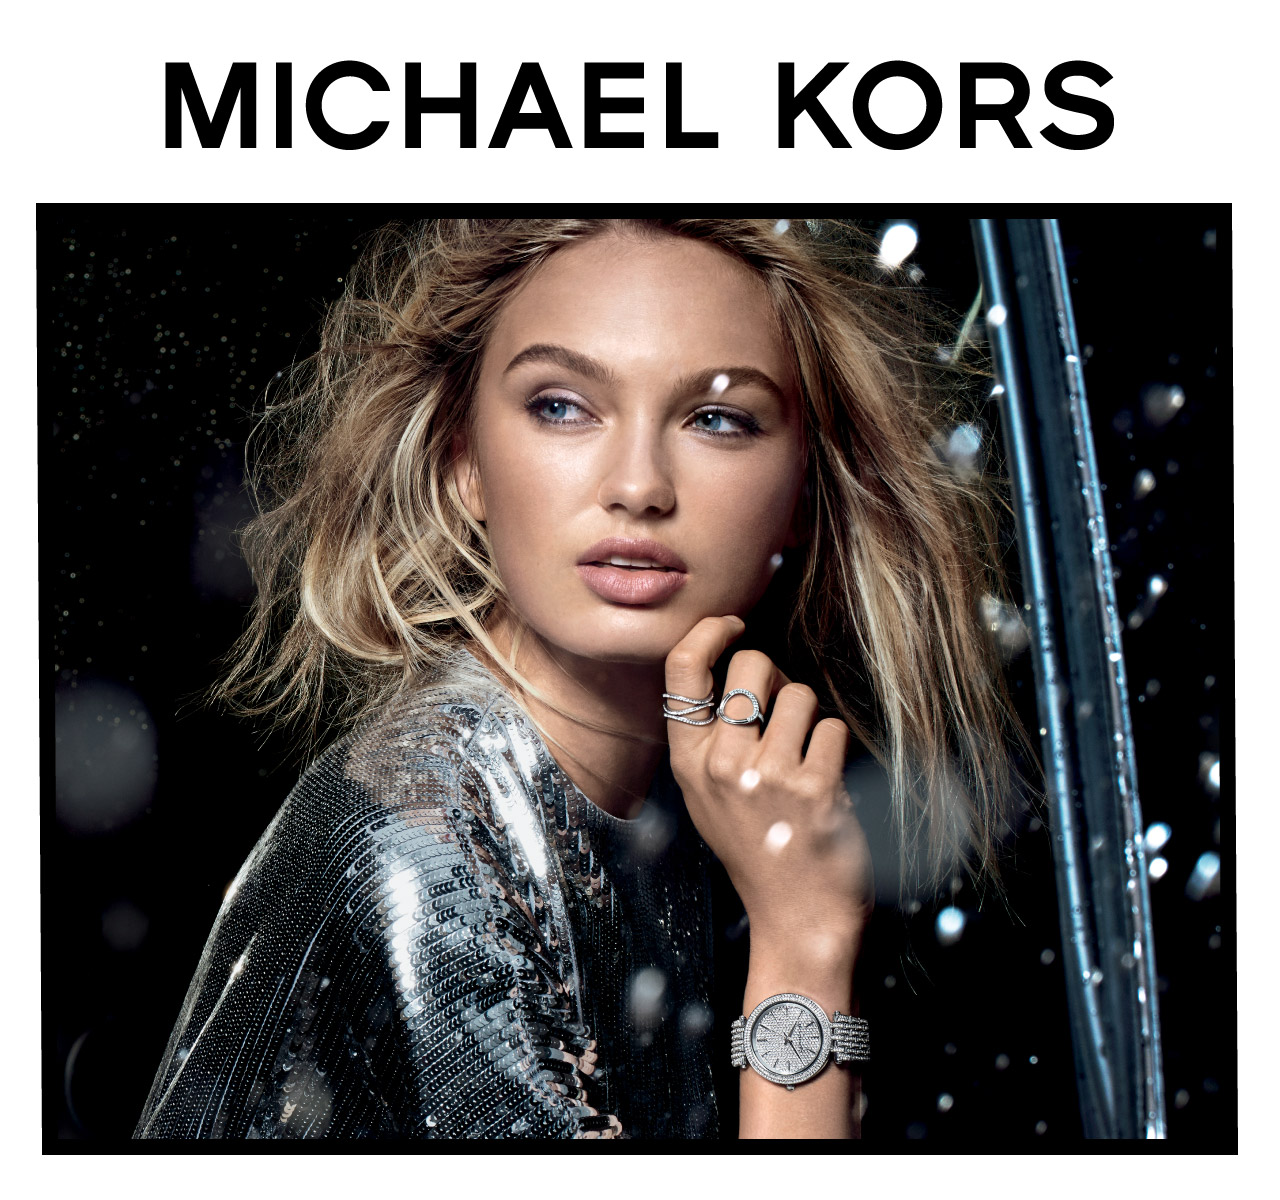 Its been 10 years since InteragencyboardShops IS COOL Michael Michael Kors   InteragencyboardShops HK